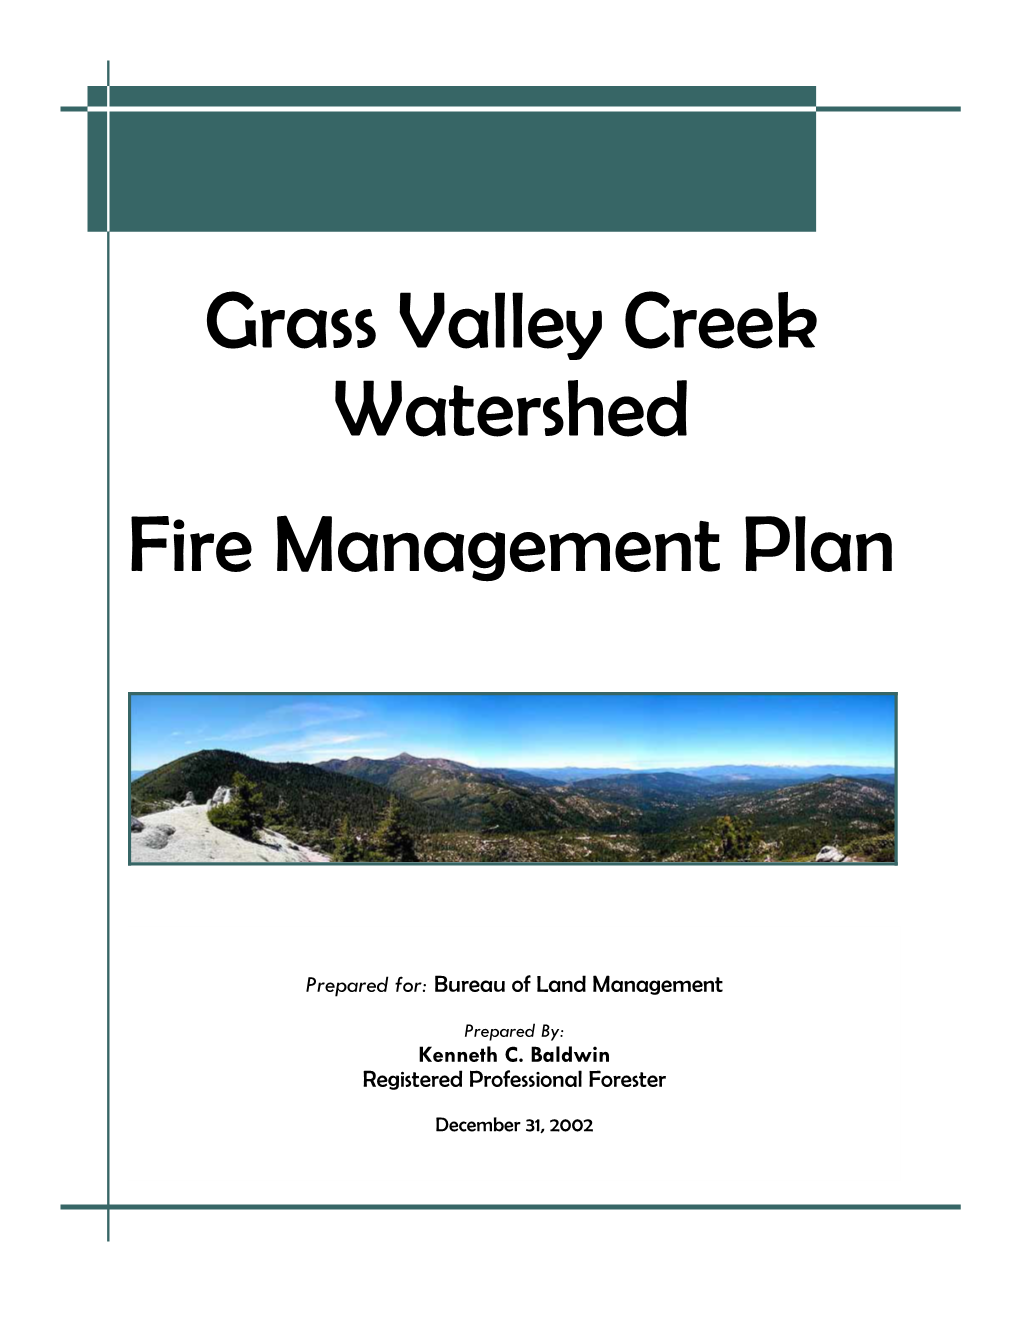 Grass Valley Creek Watershed Fire Management Plan